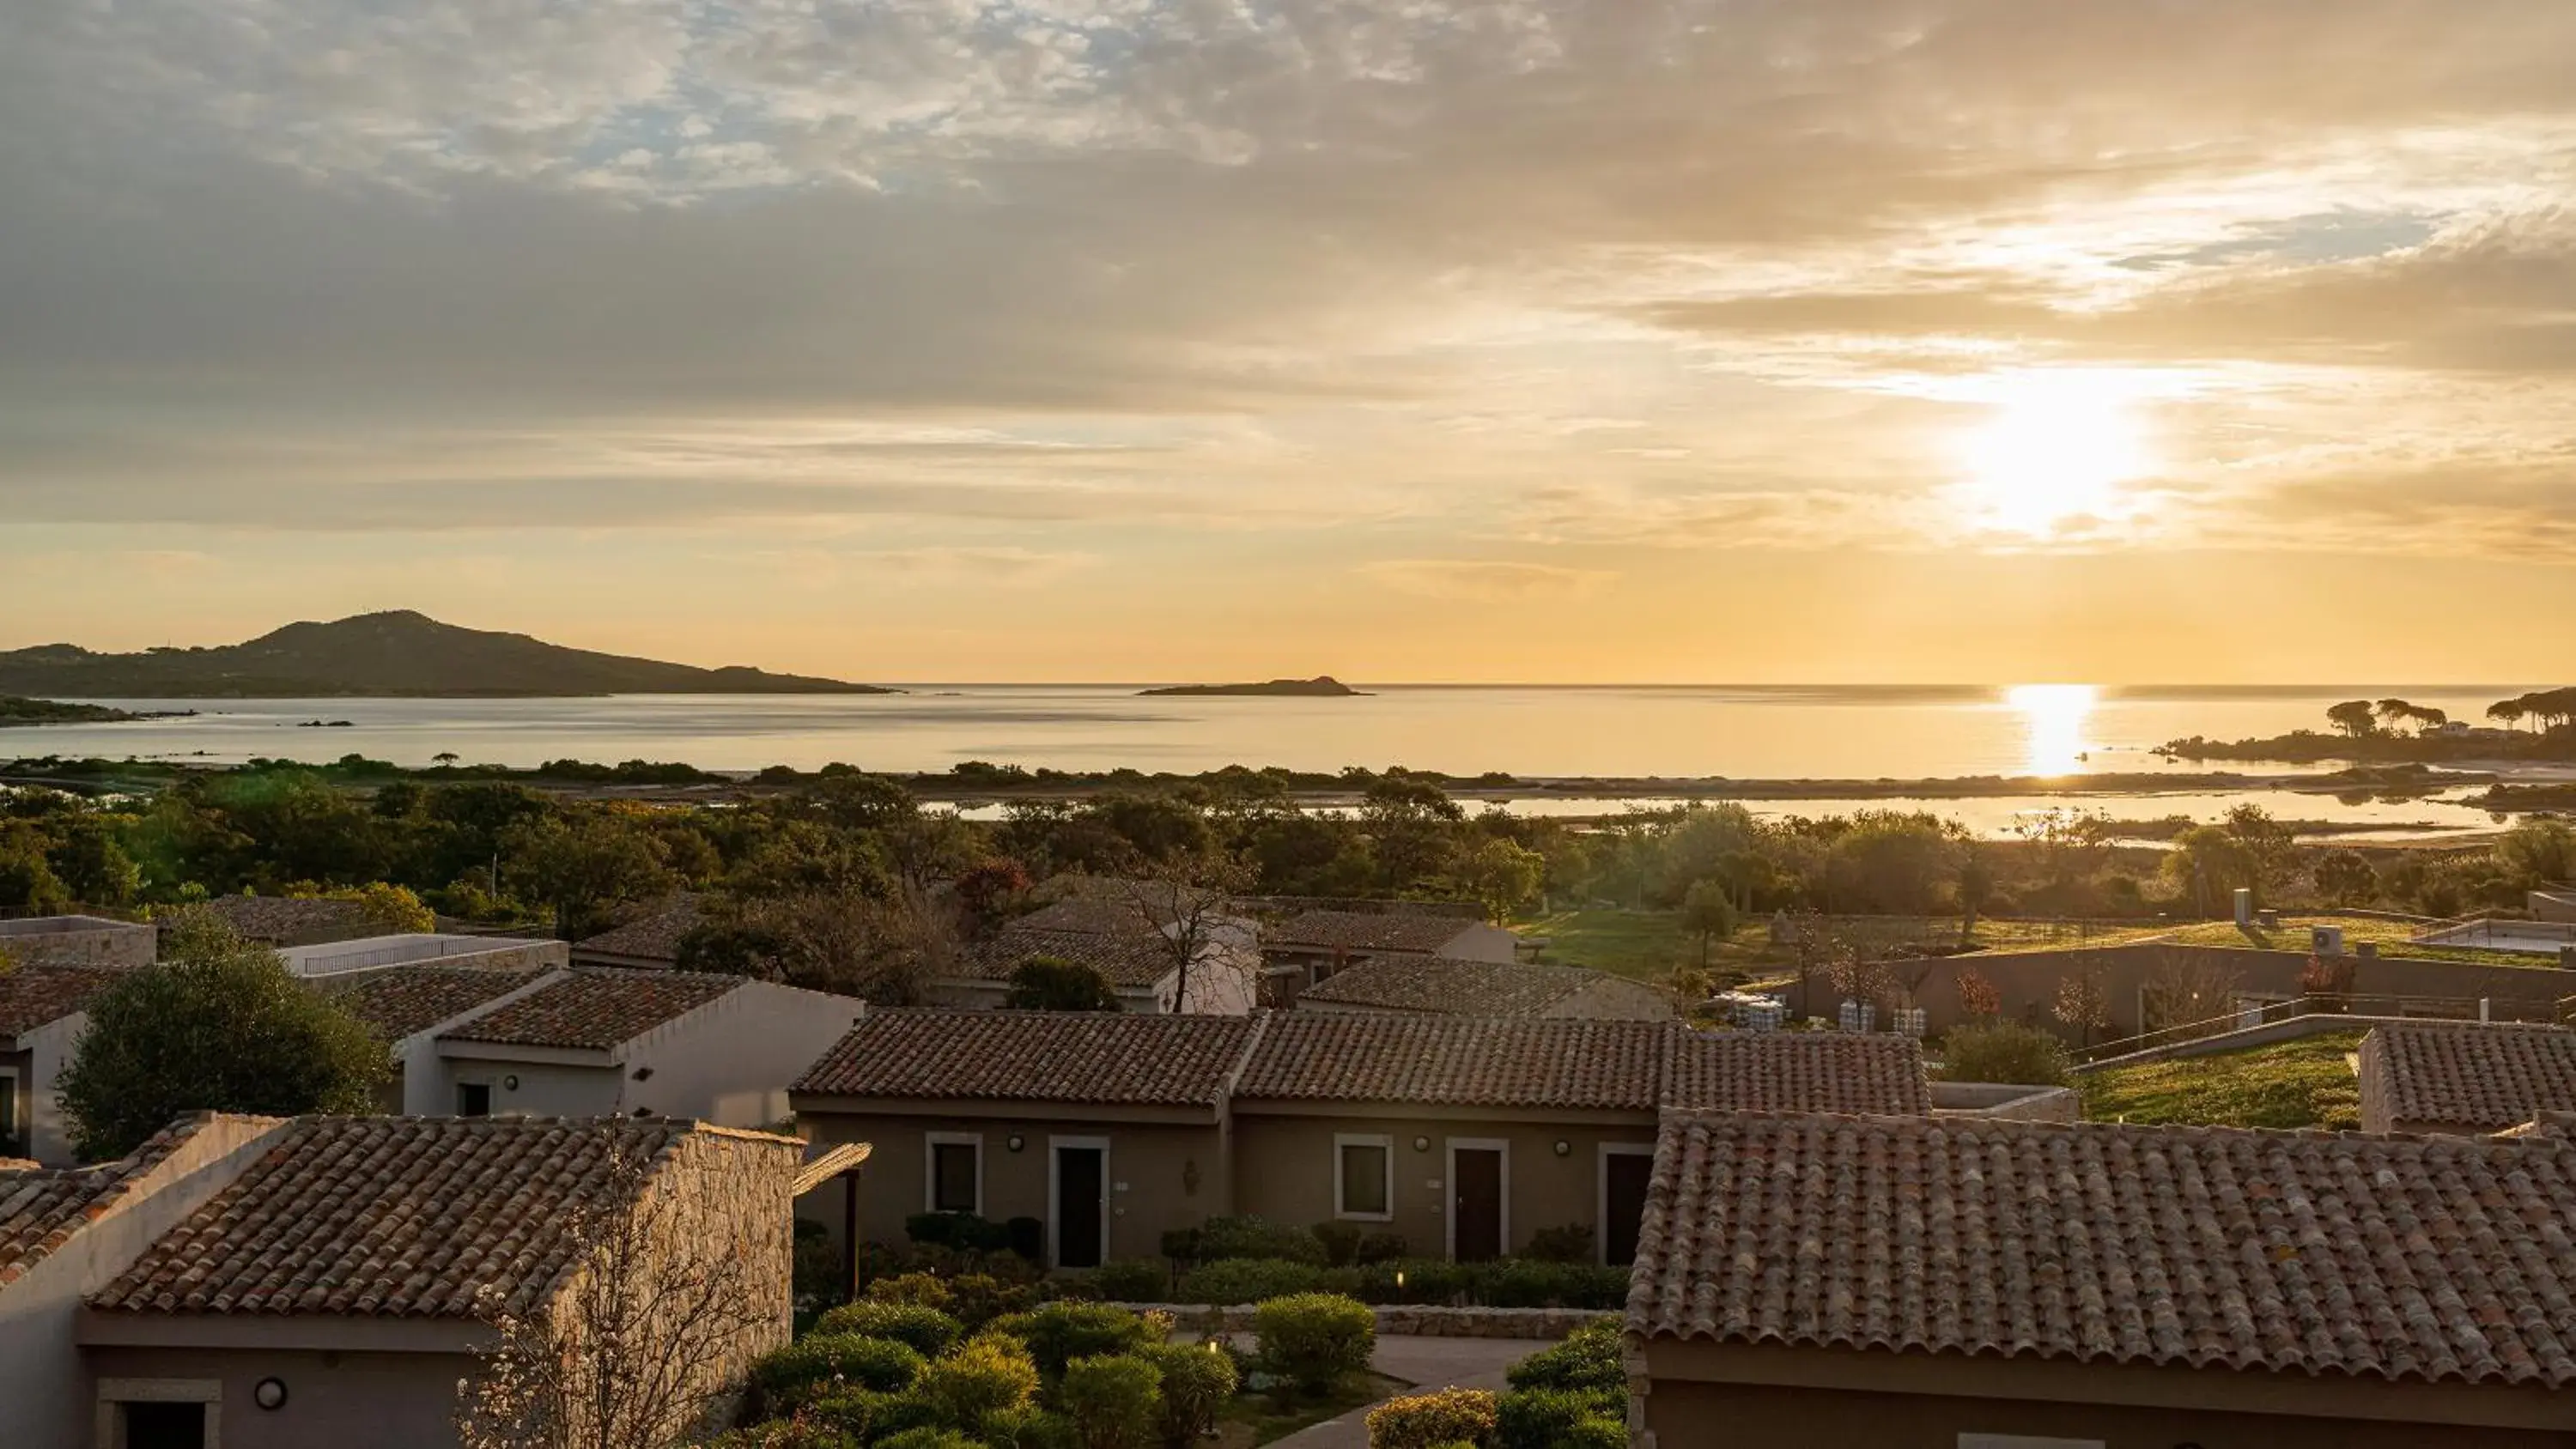 Sunset in Baglioni Resort Sardinia - The Leading Hotels of the World